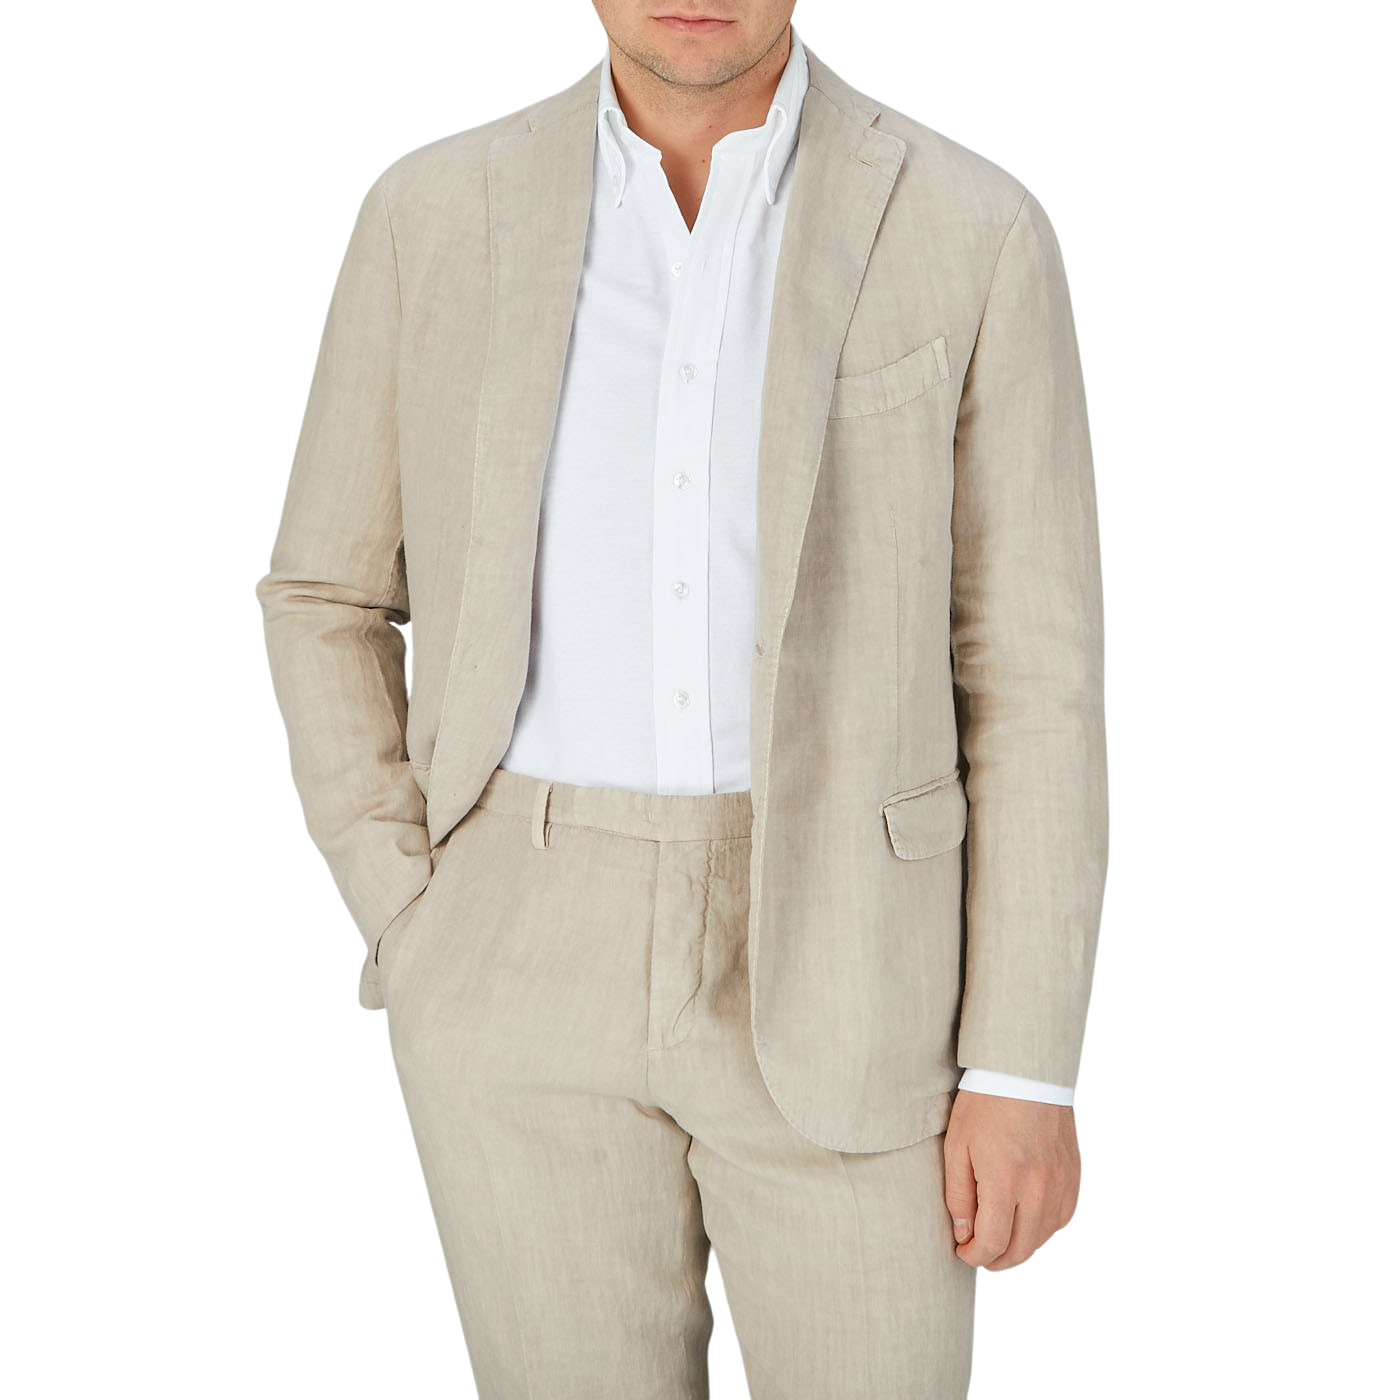 A gentleman dressed in a Boglioli Sand Beige Washed Linen Unstructured Suit and white shirt.